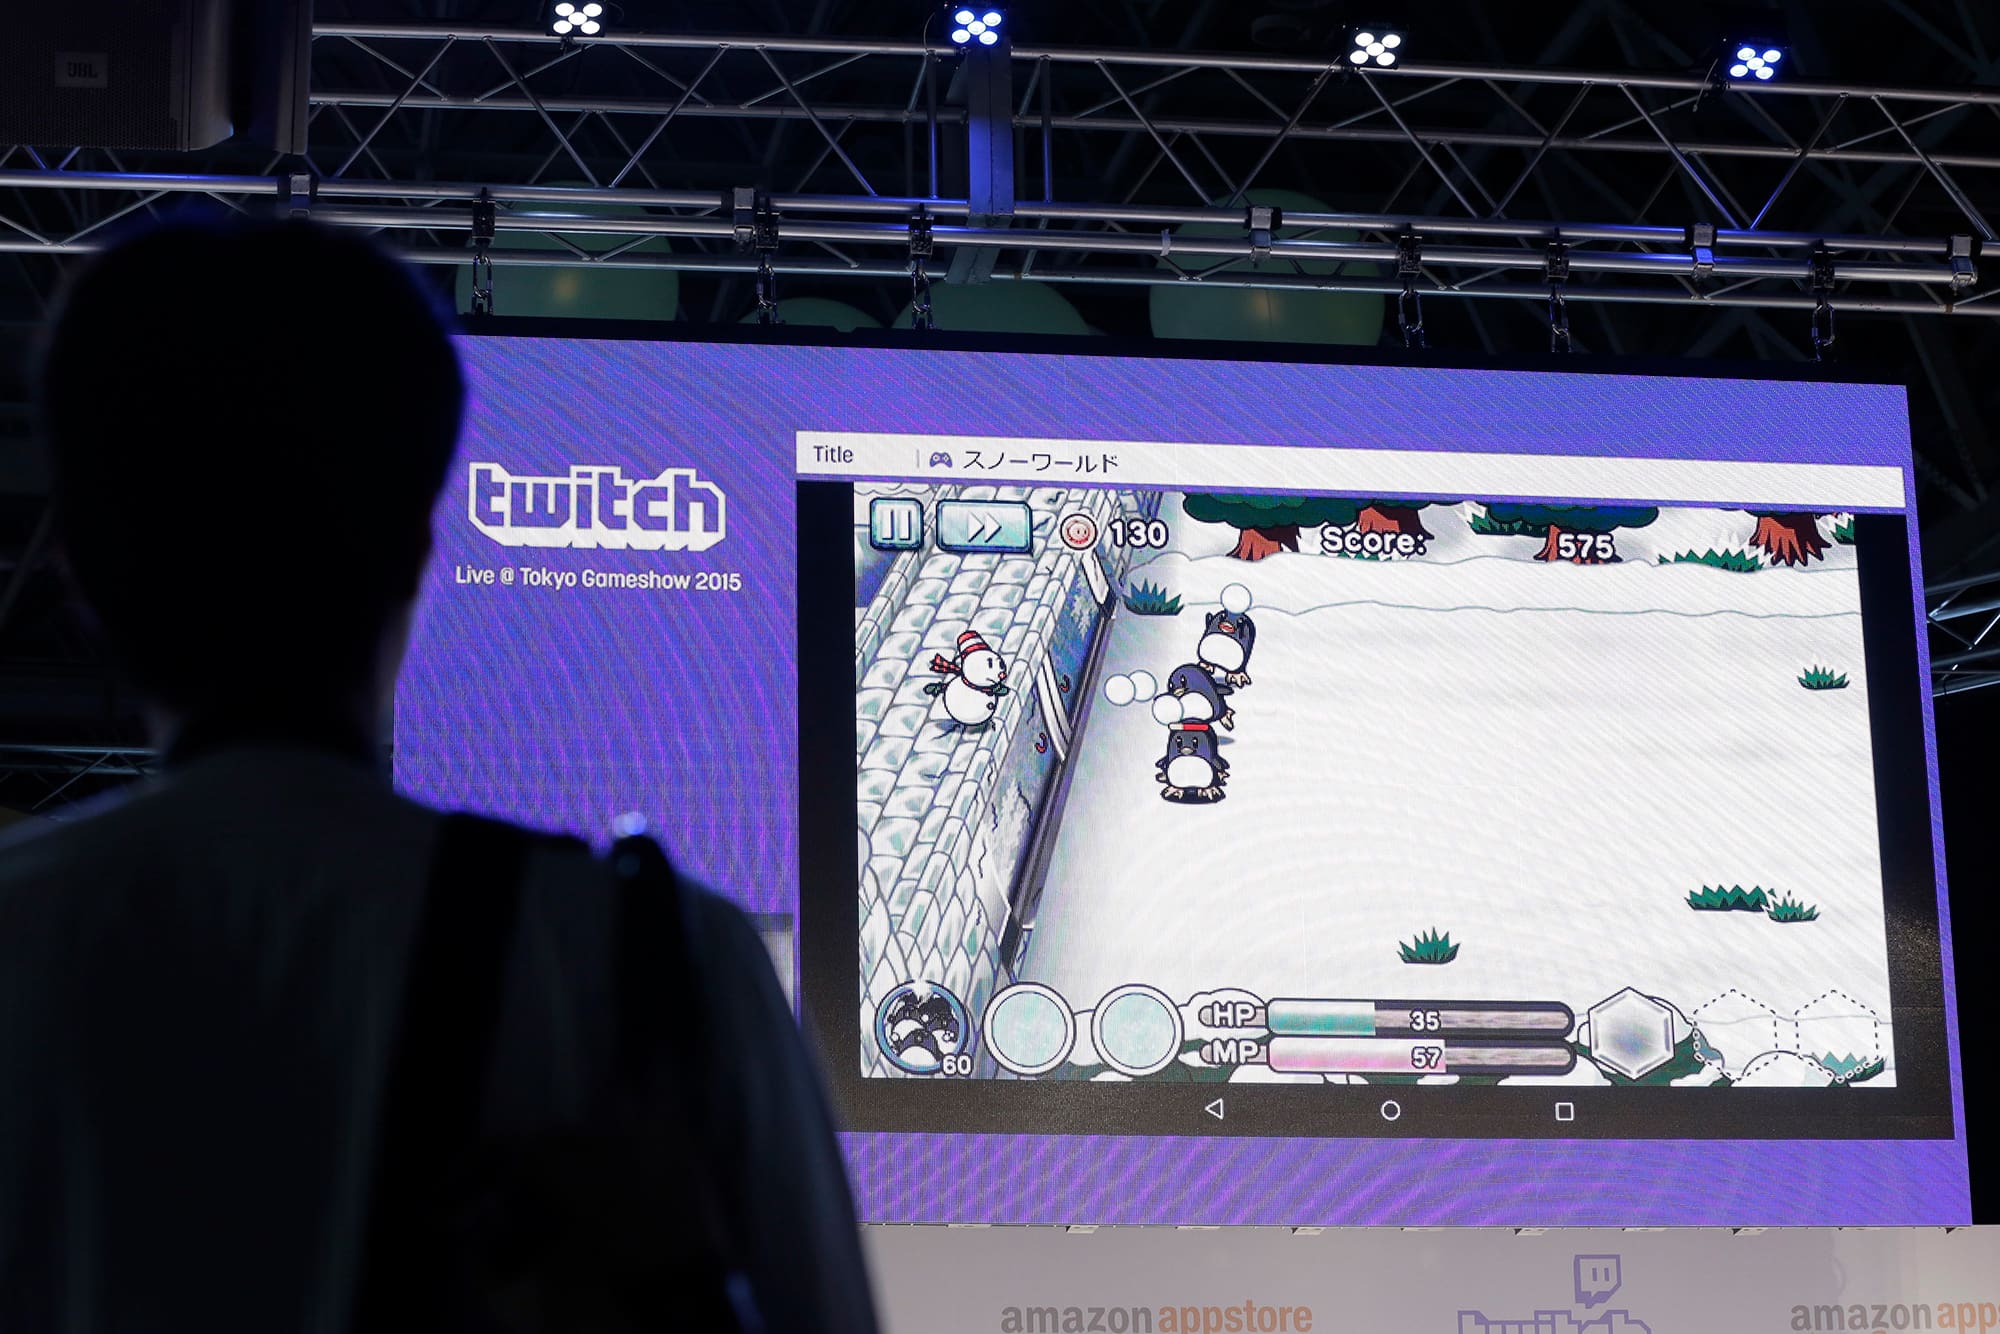 Hacker breaches Amazon's Twitch video site, exposing future product plans